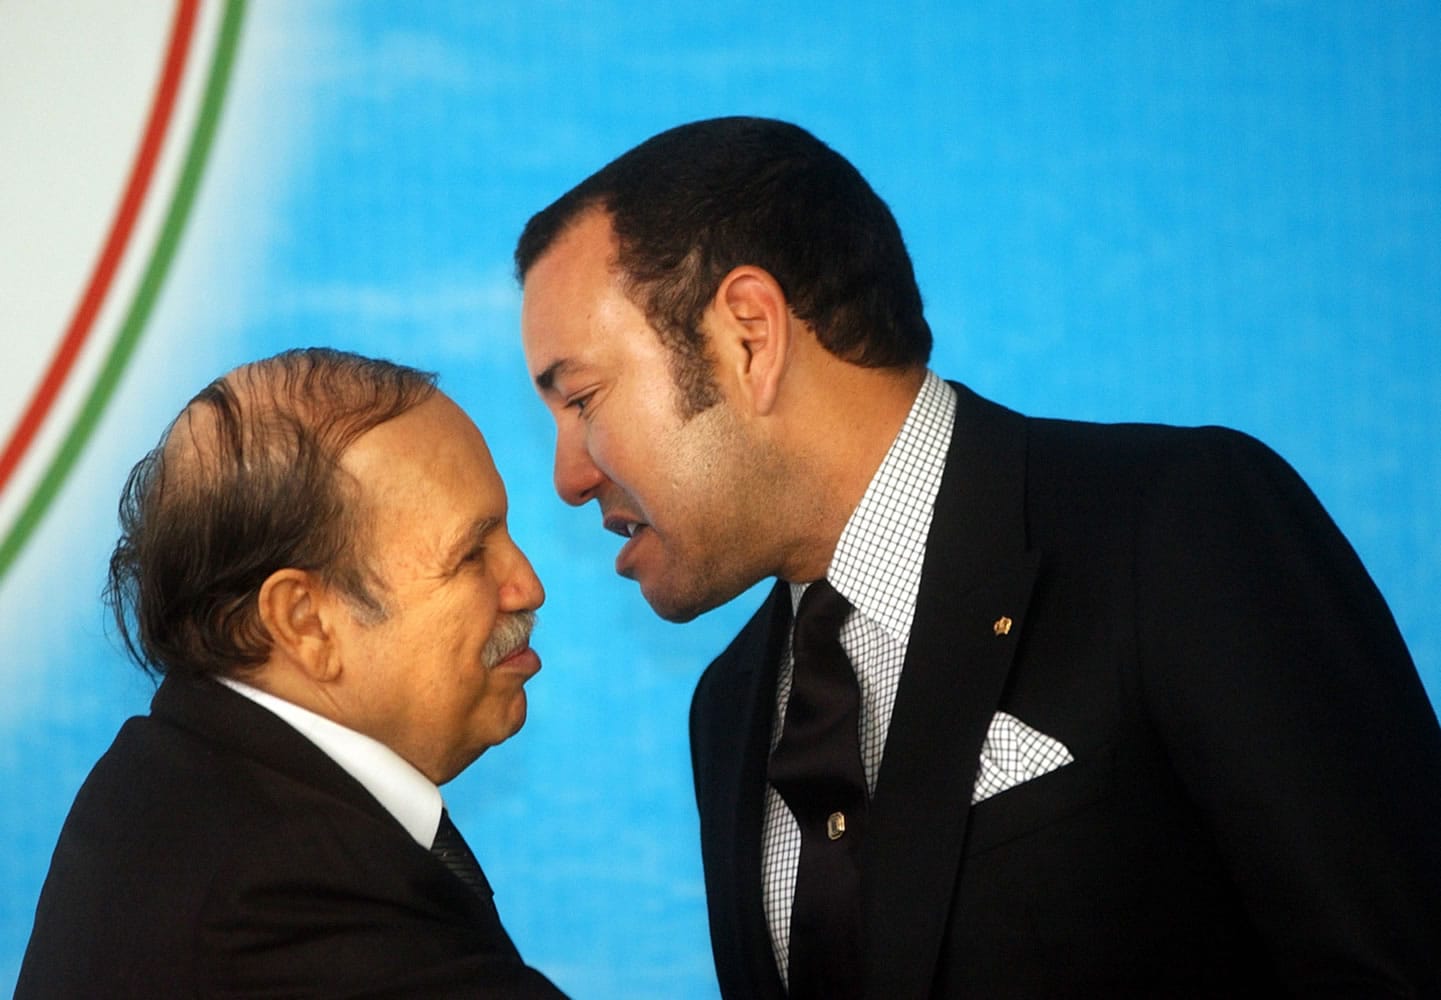 Algerian President Abdelaziz Bouteflika, left, listens to Morocco King Mohammed VI  prior to the opening  session of the 17th League of Arab States' summit in Algiers, Algeria, in 2005.